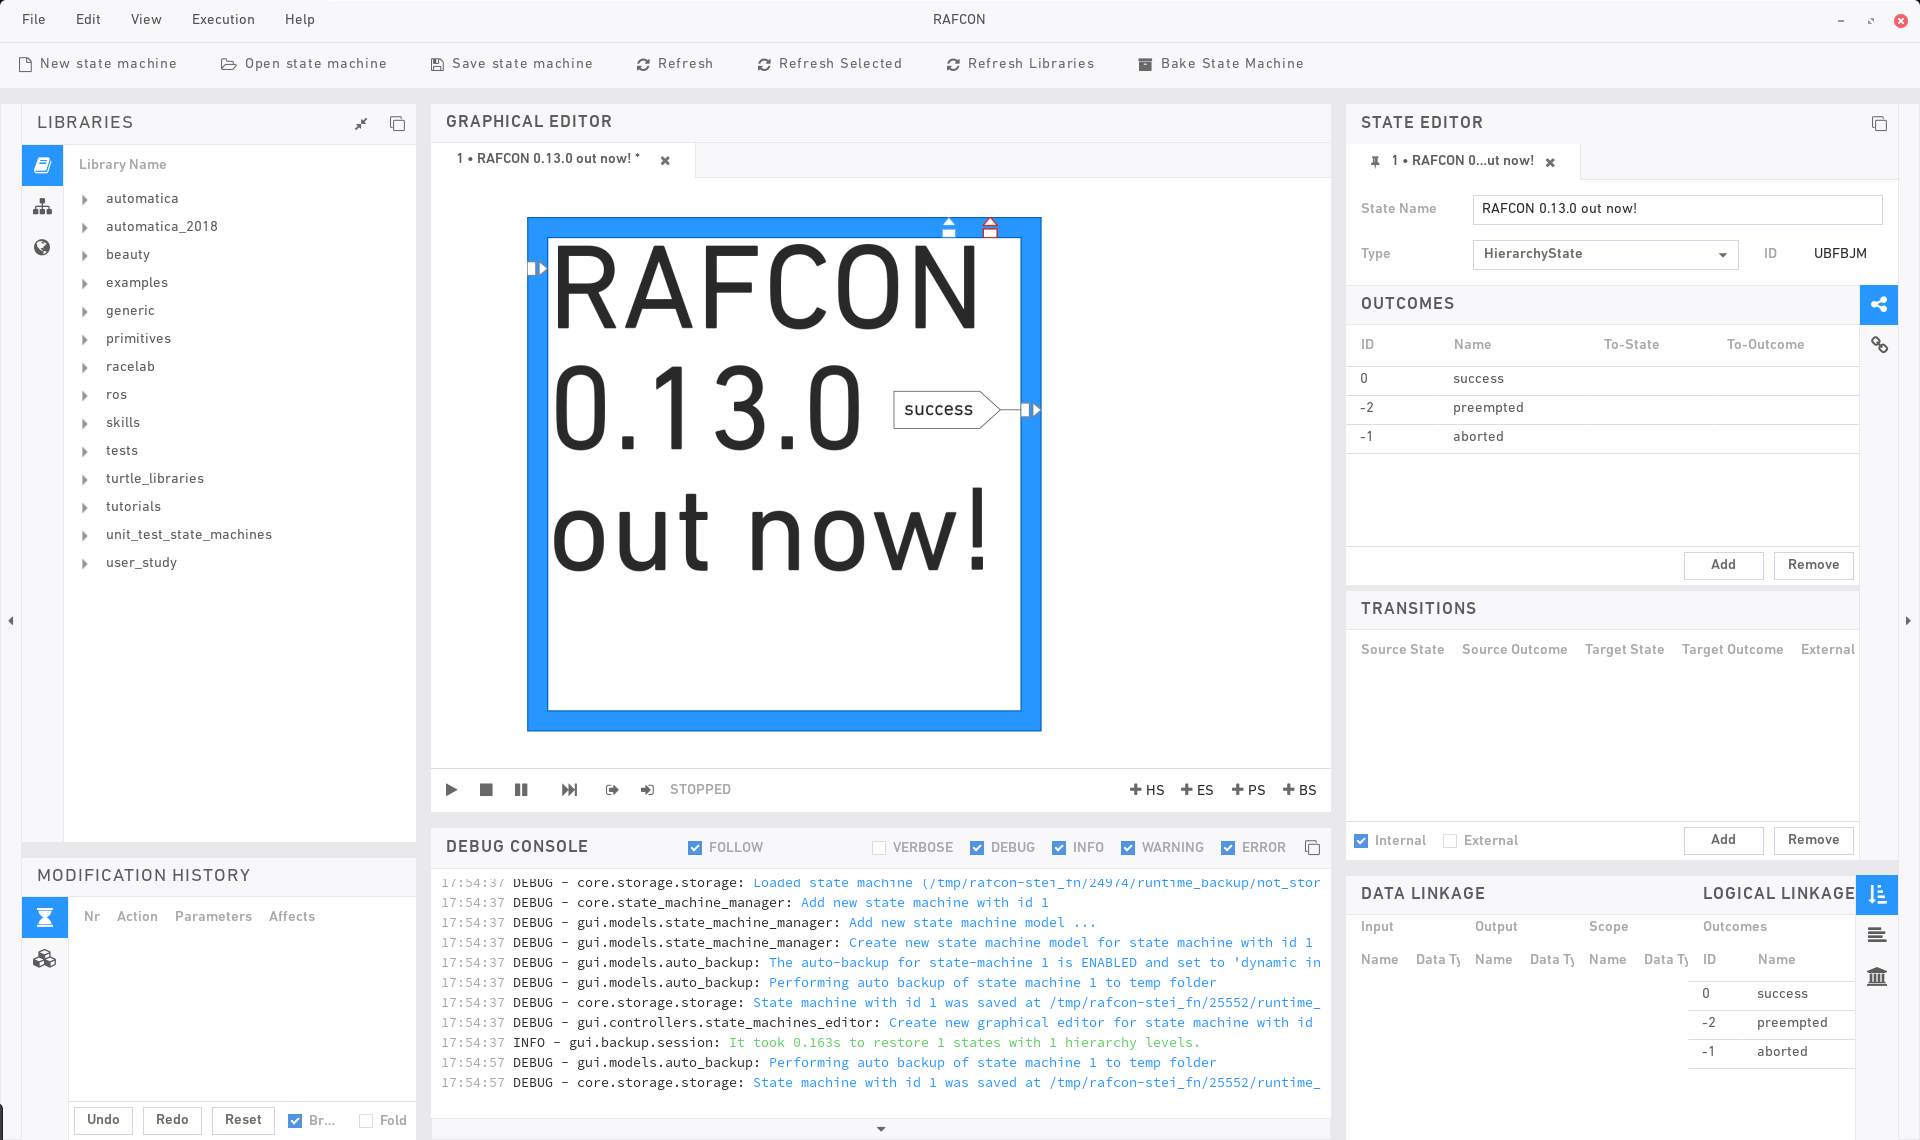 The new light theme of RAFCON